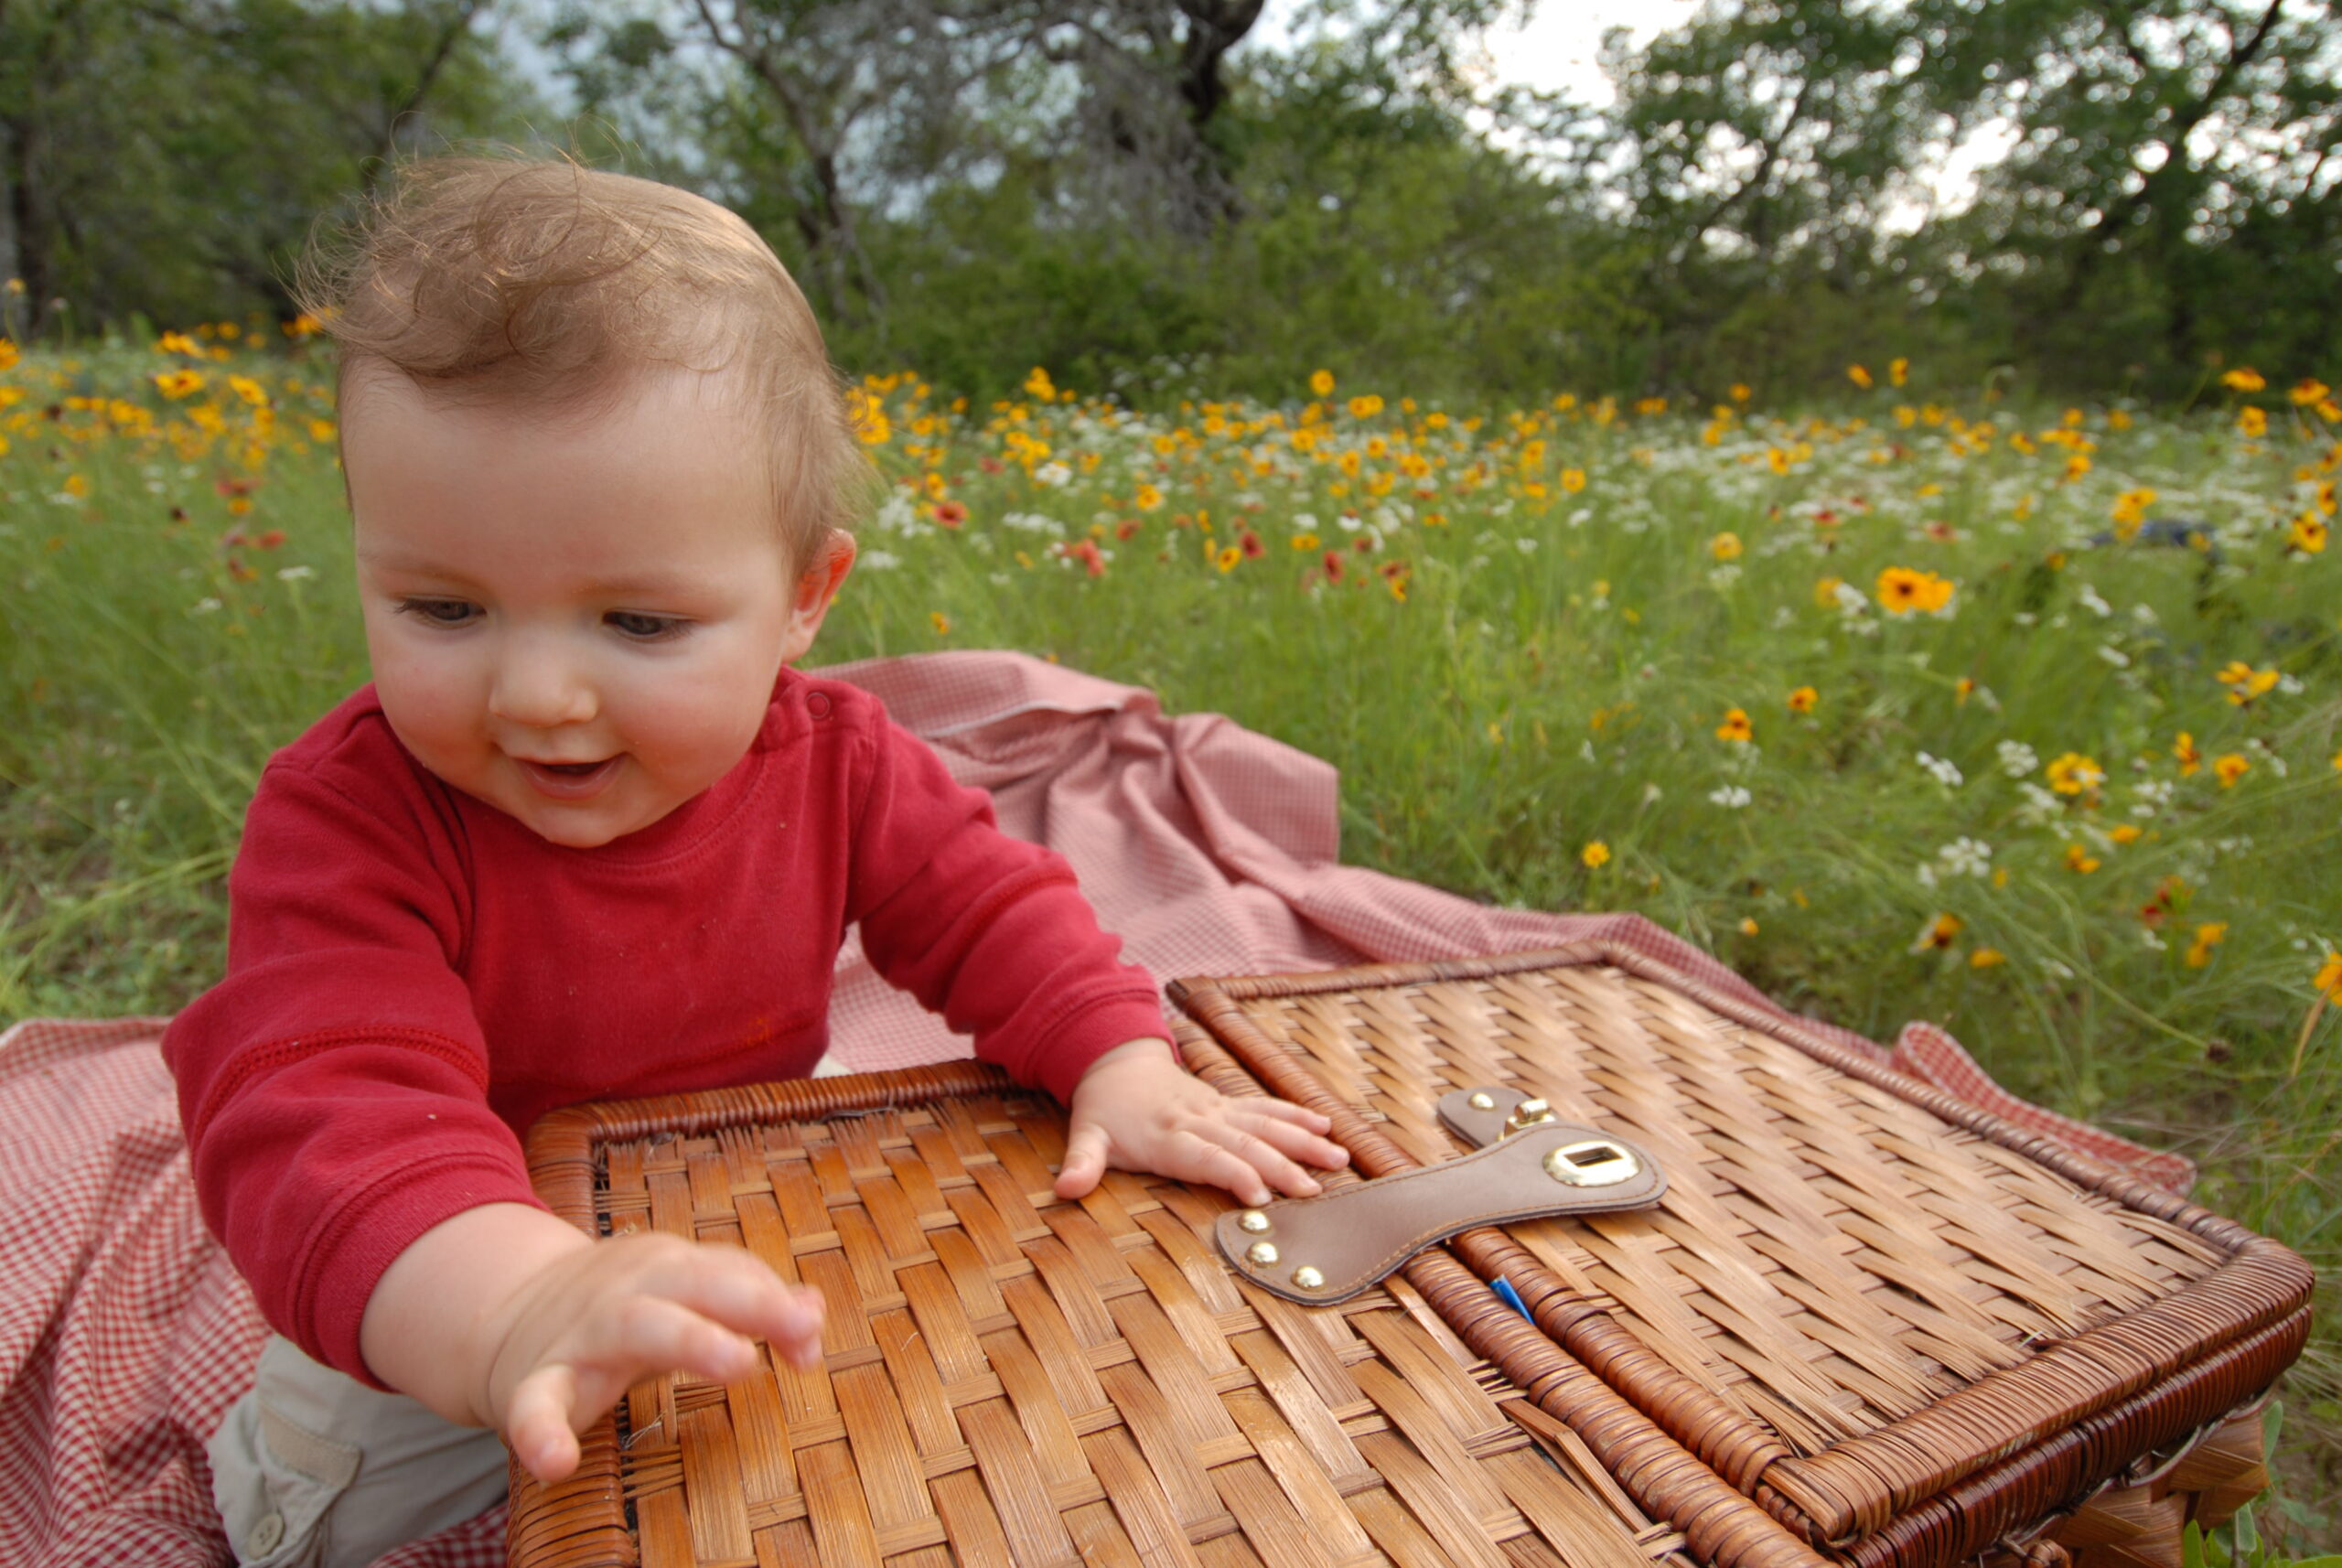 A baby playing with a wicker basket in a field.